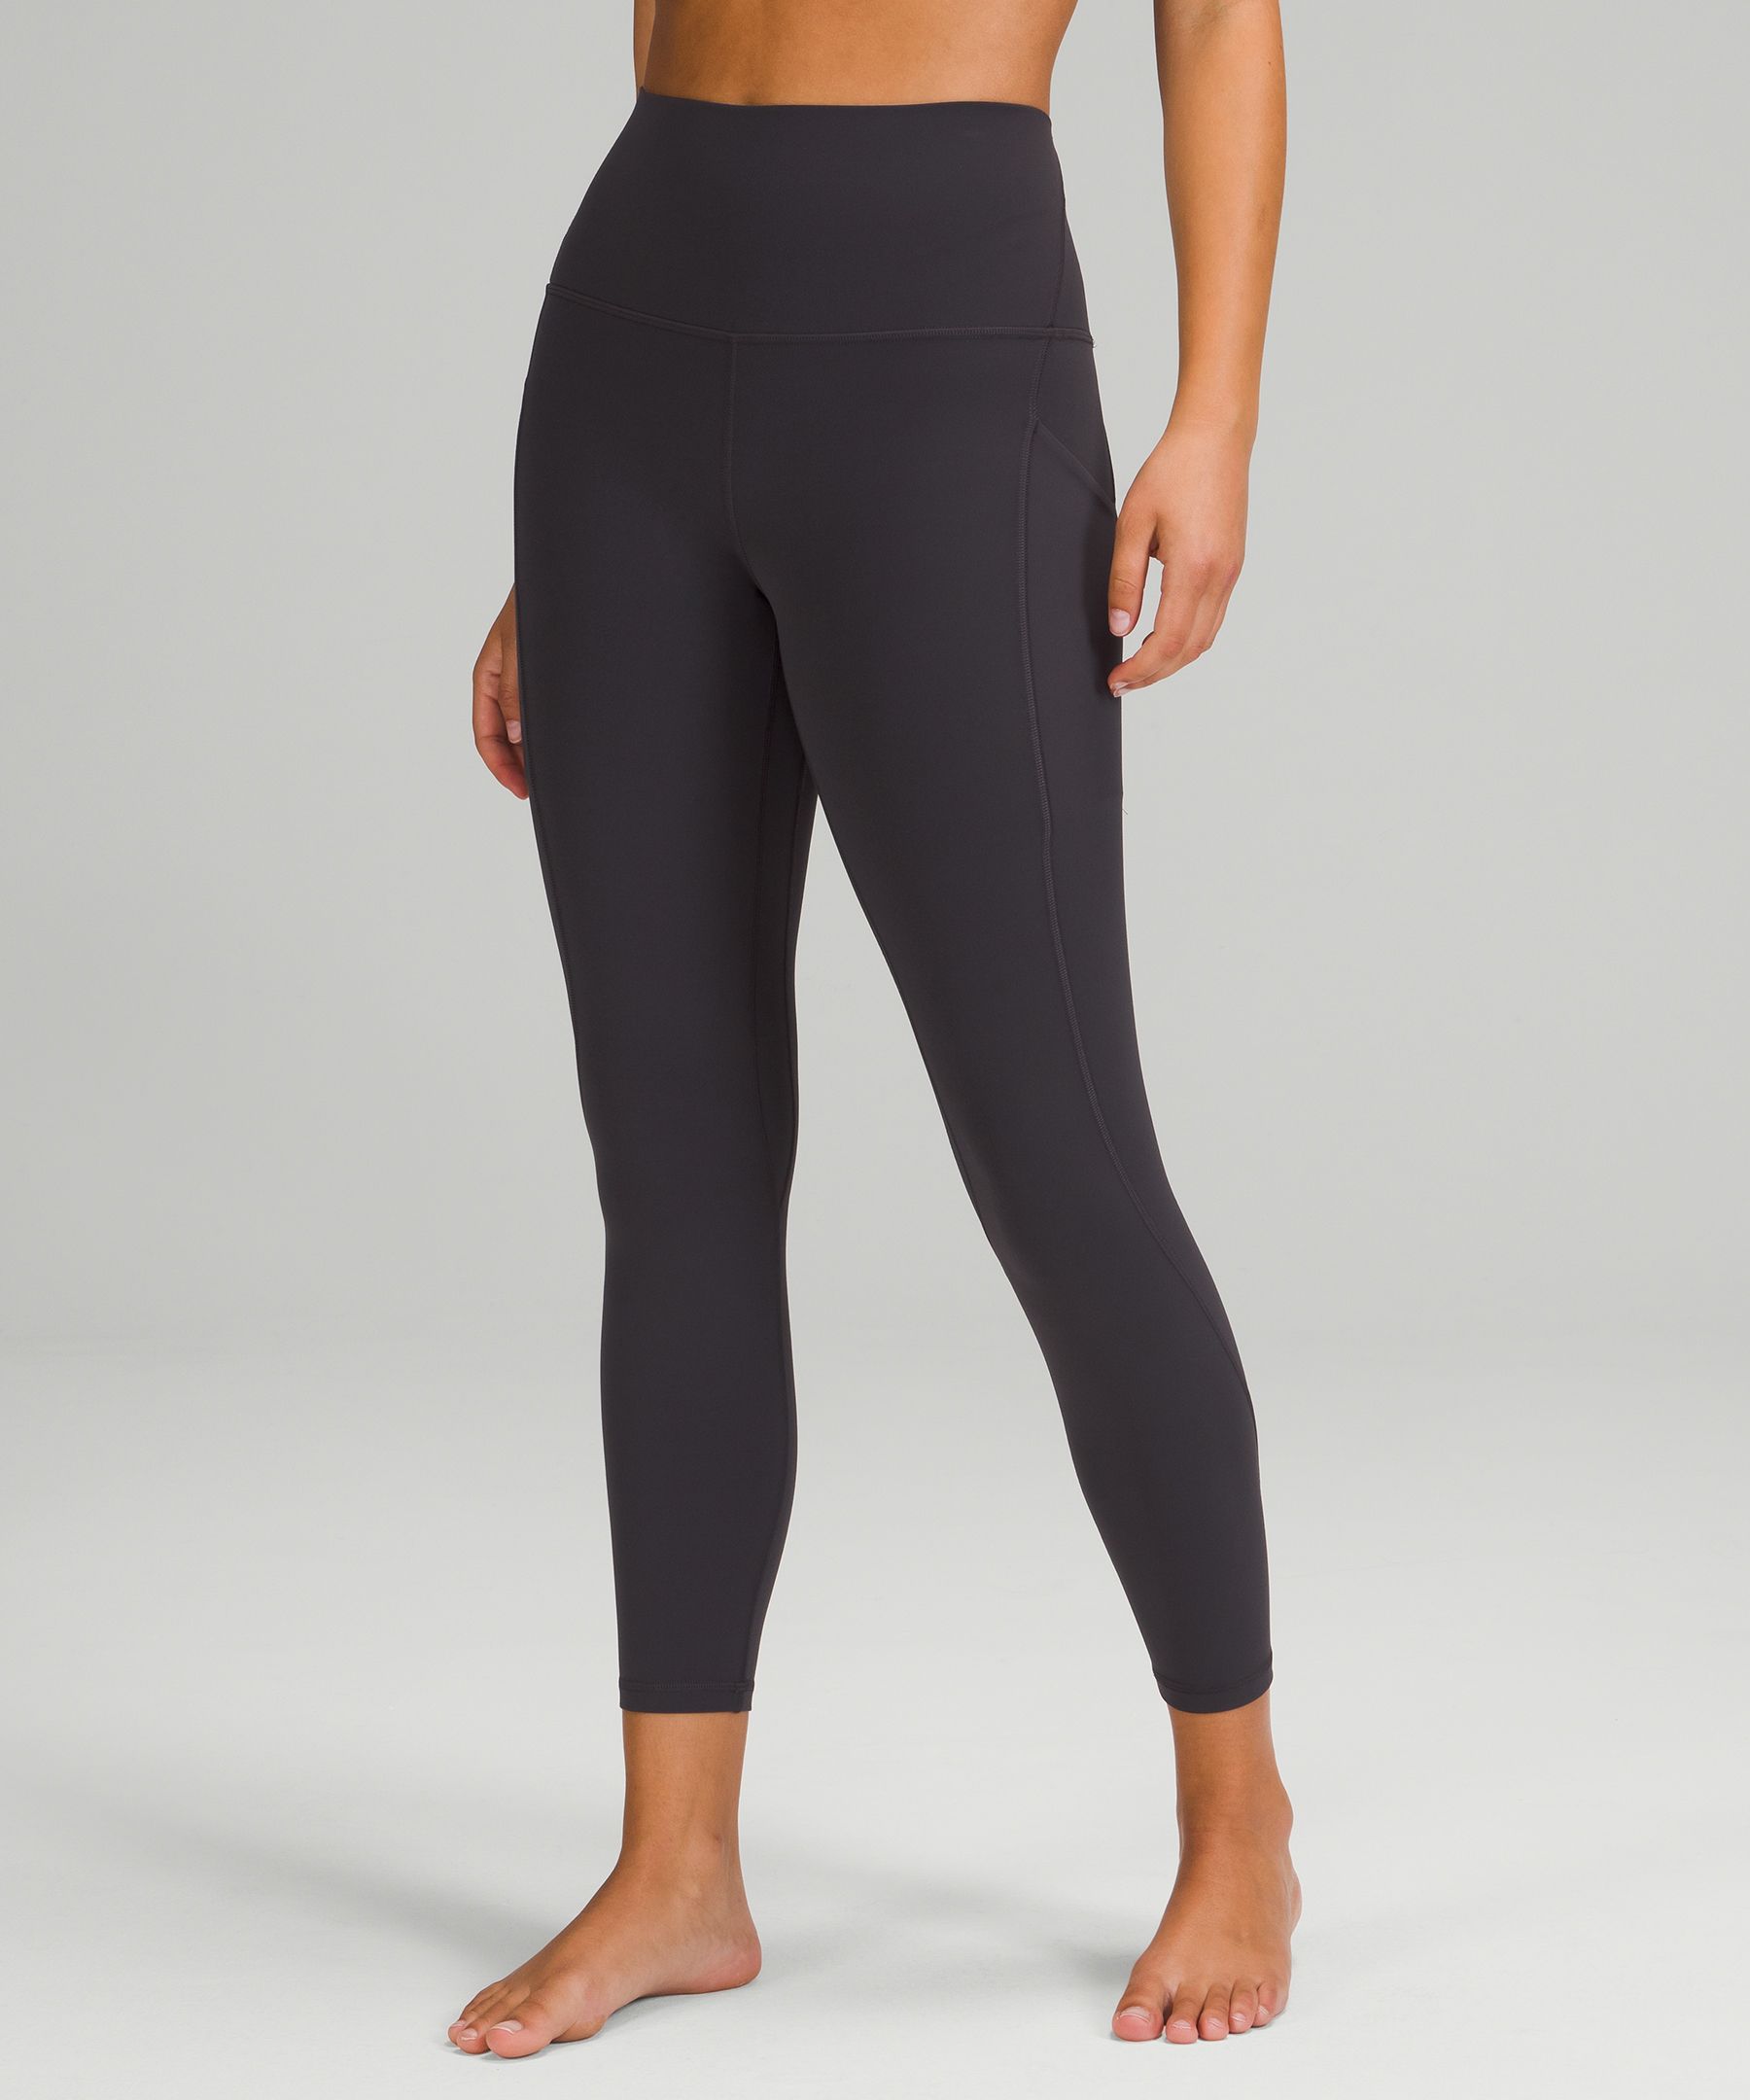 Lululemon Align High-Rise Pant with Pockets 25 - Mulled Wine